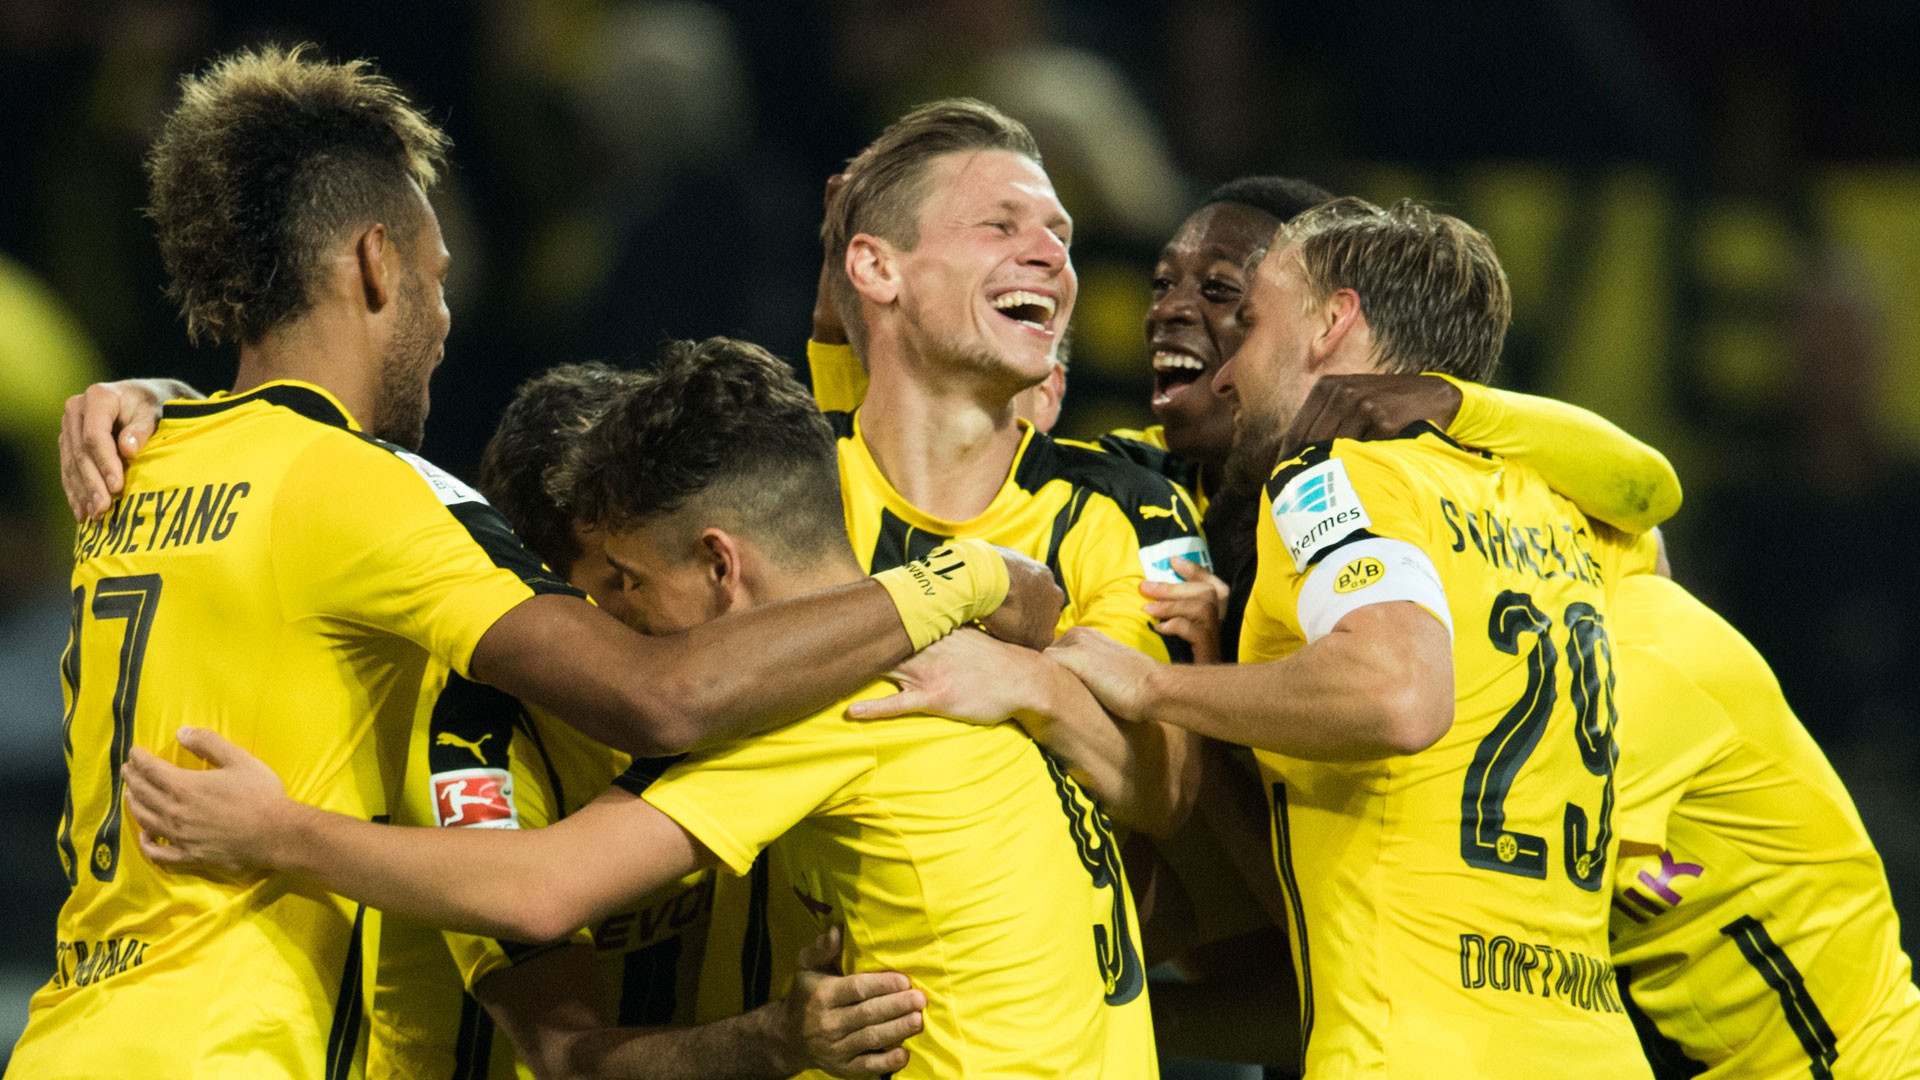 1920x1080 Pierre-Emerick Aubameyang, Lukasz Piszczek and Raphael Guerreiro were on  target for the home side to wrap up a third straight Bundesliga victory